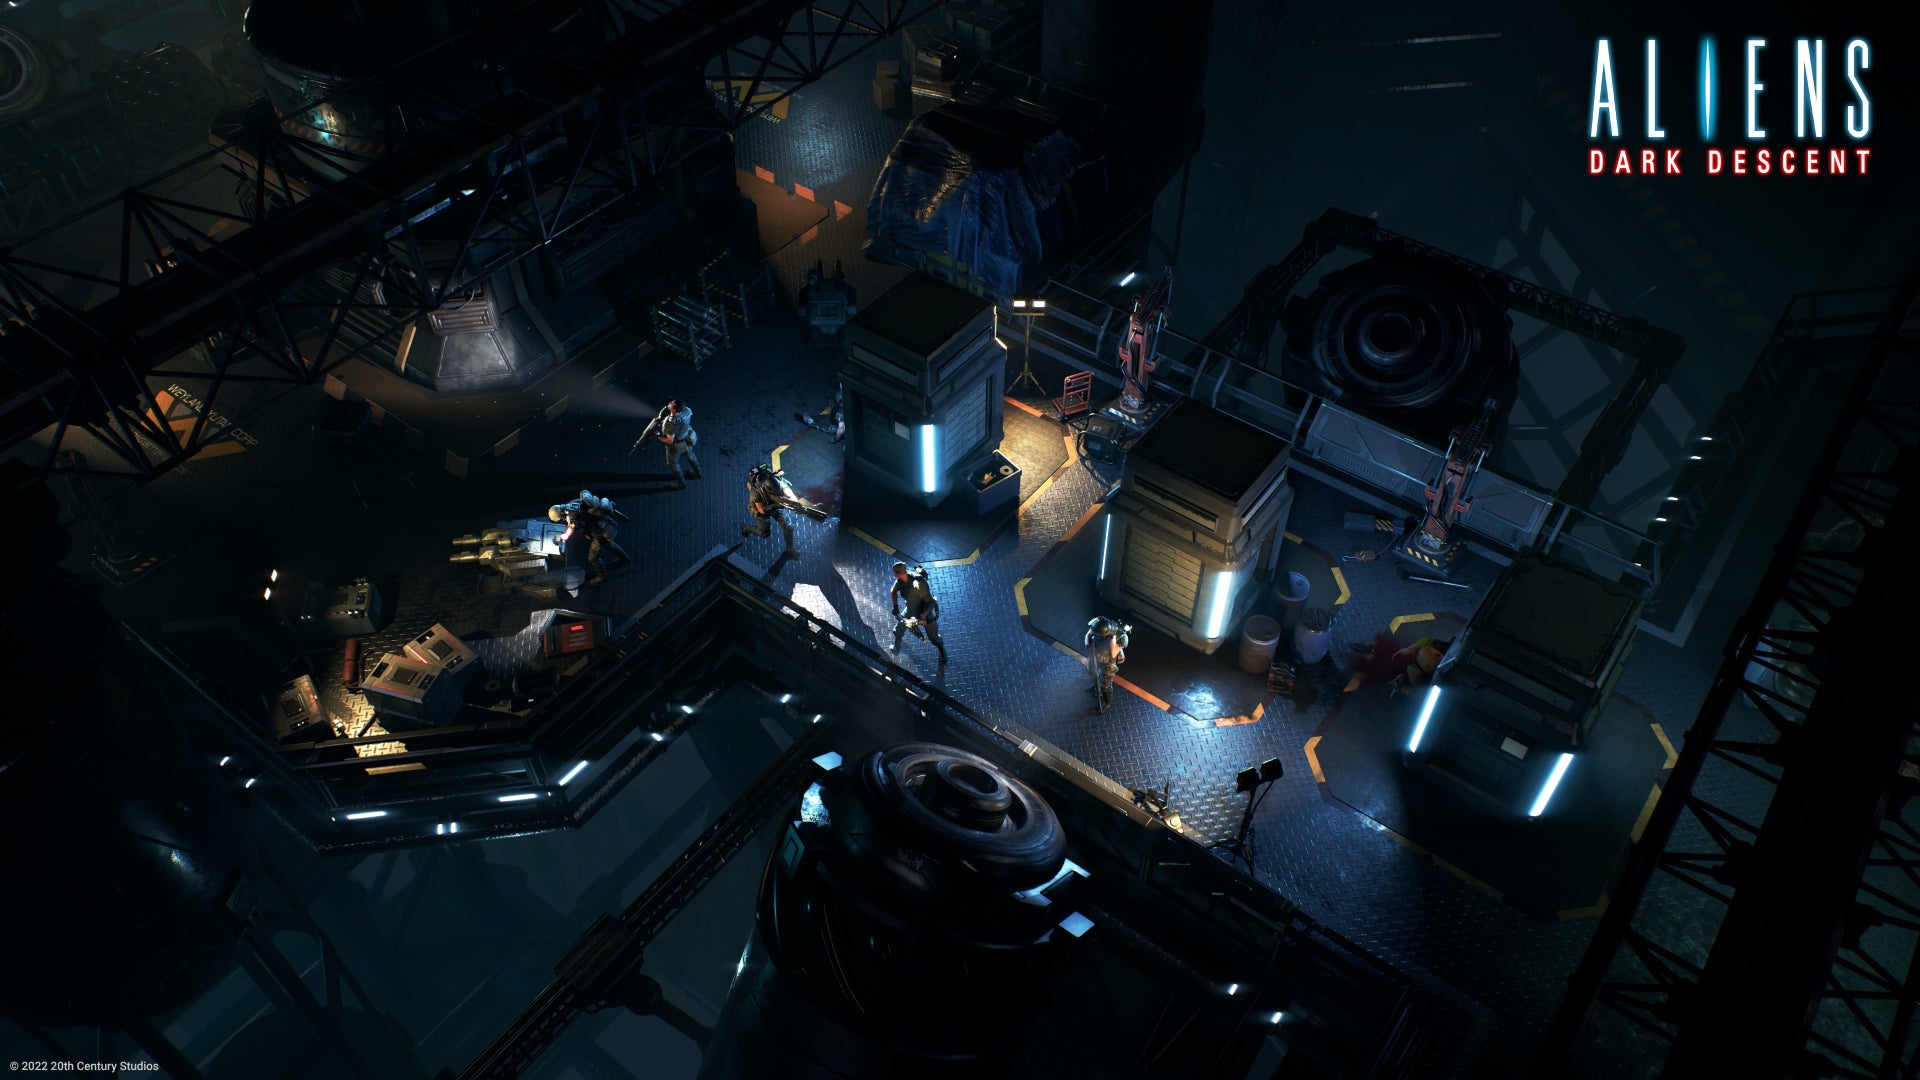 Multiple players scope out an area in Aliens: Dark Descent